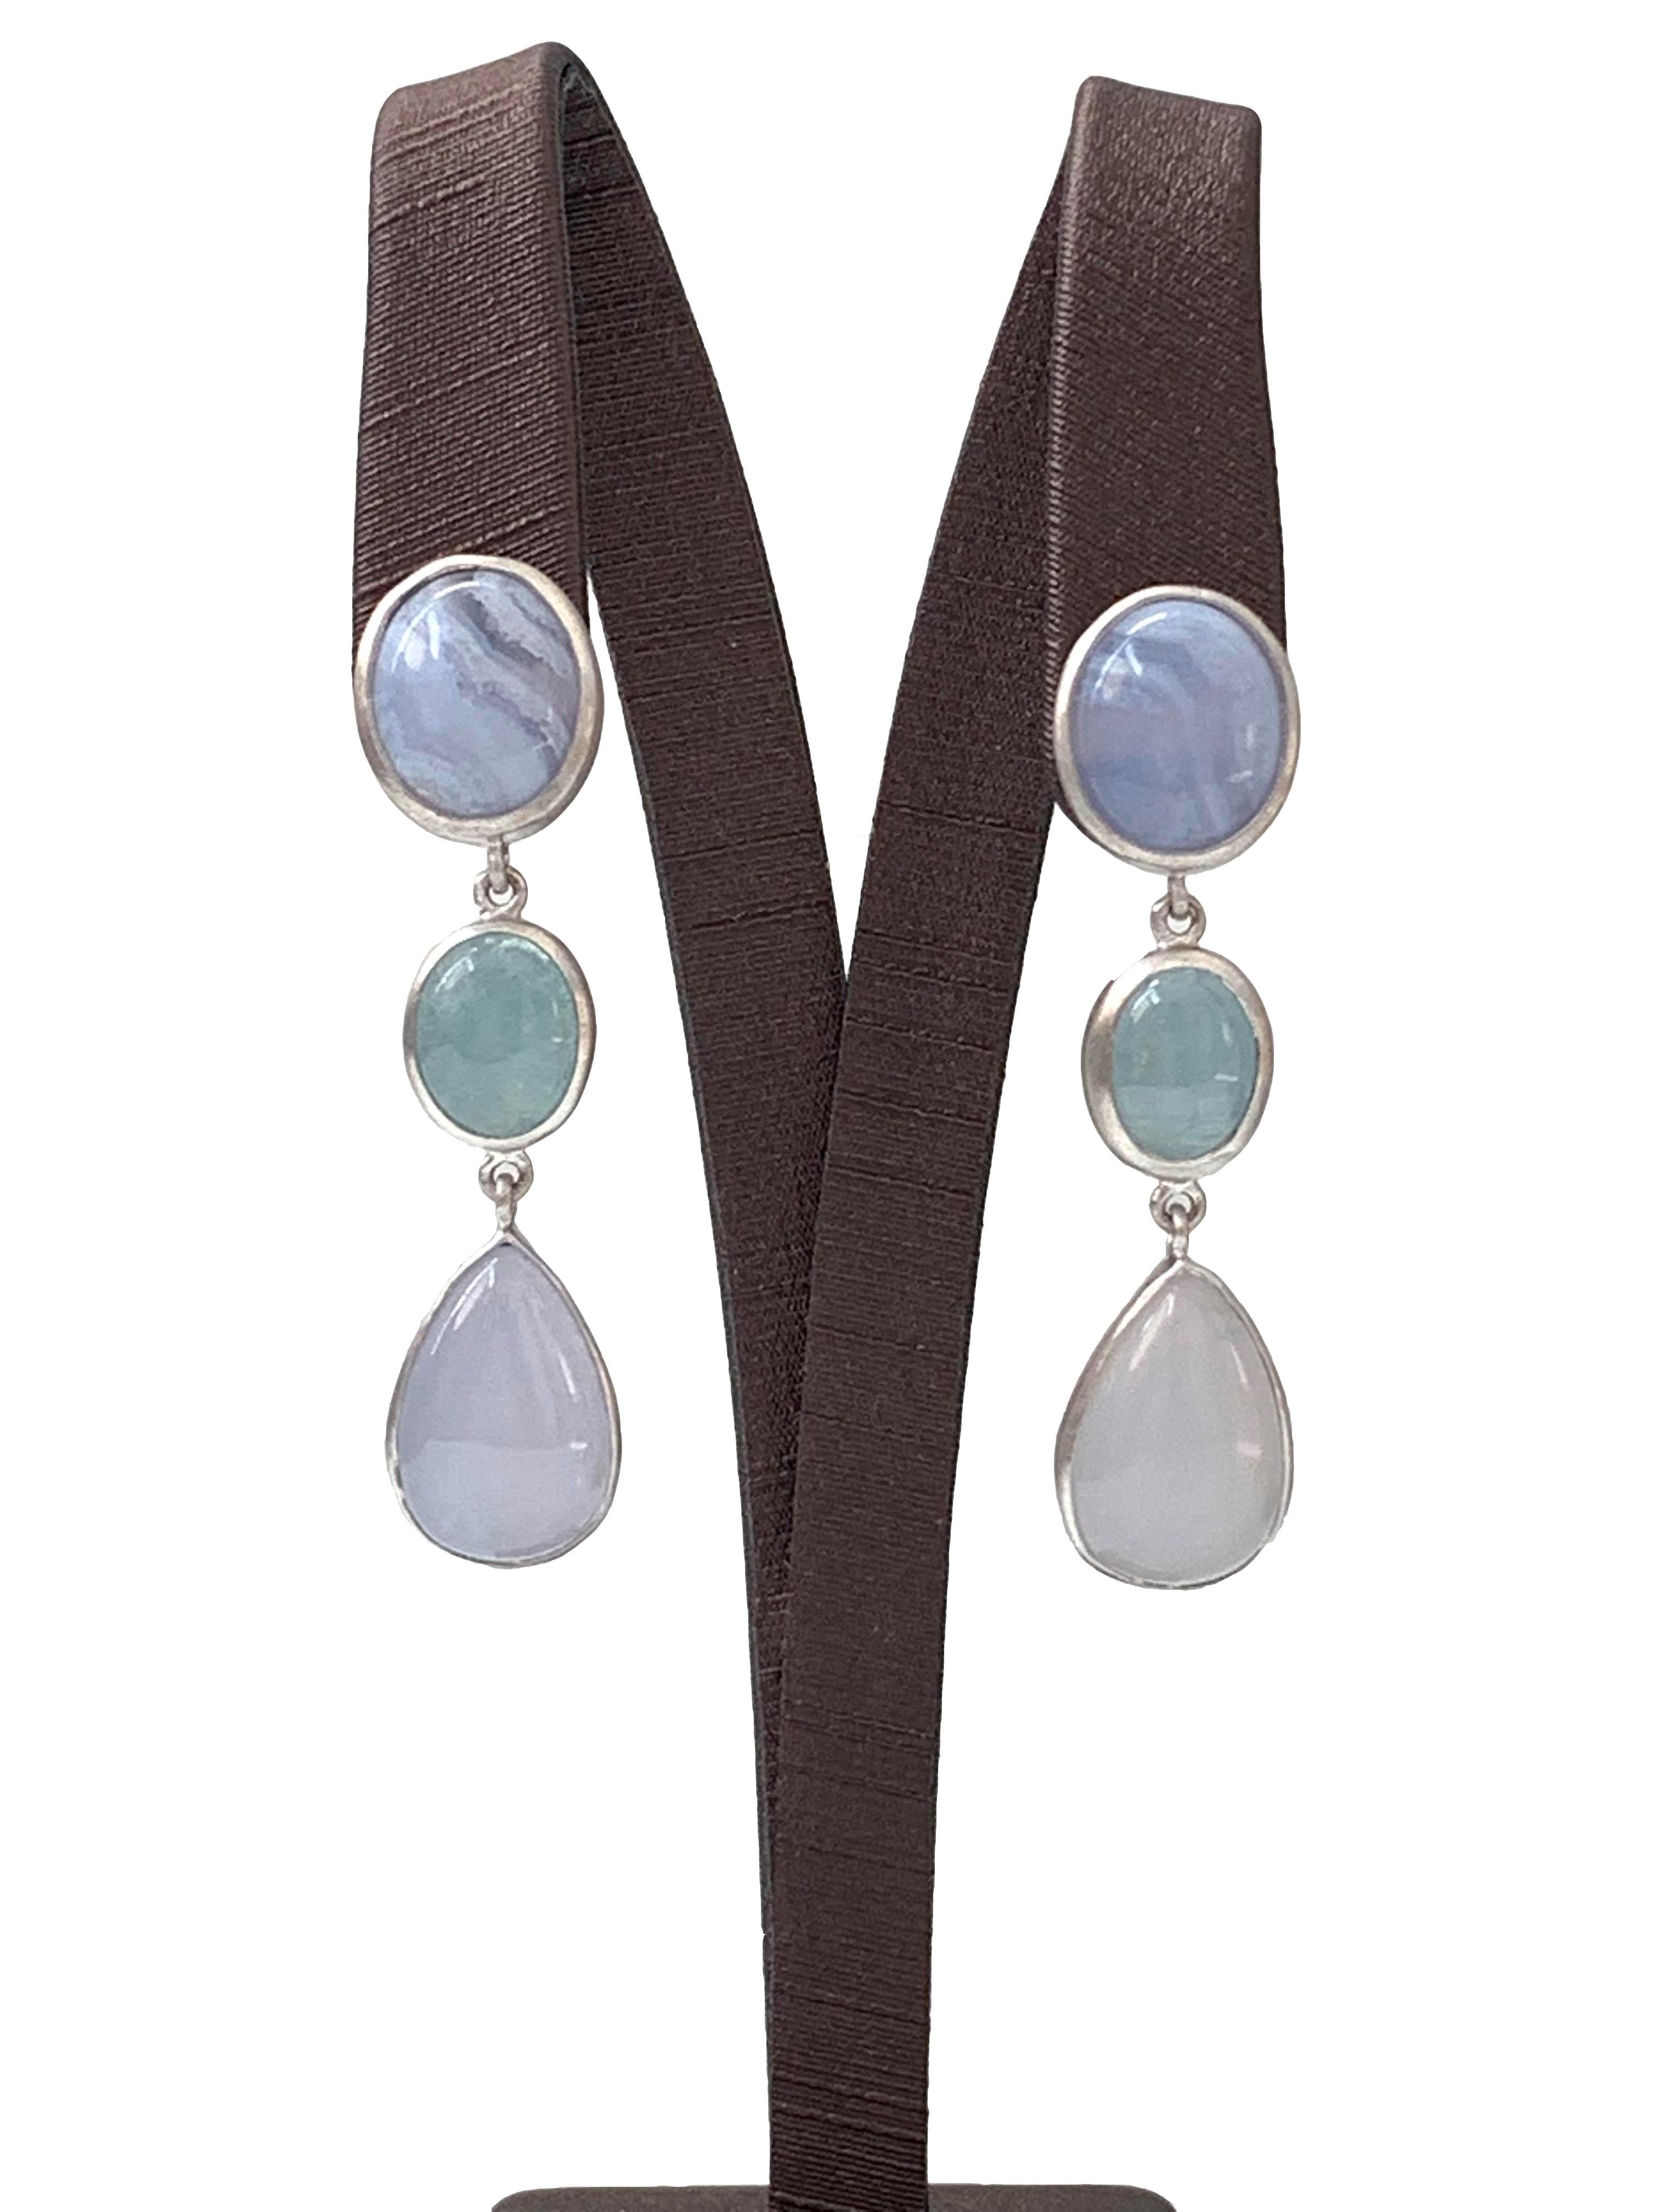 Discover these oval chalcedony, oval aquamarine and pear-shape chalcedony Dangle Earrings.  

The earrings feature 6 pcs of beautiful cabochon-cut chalcedony and aquamarine with unique periwinkle purple-ish and pastel blue hue, handcrafted brushed